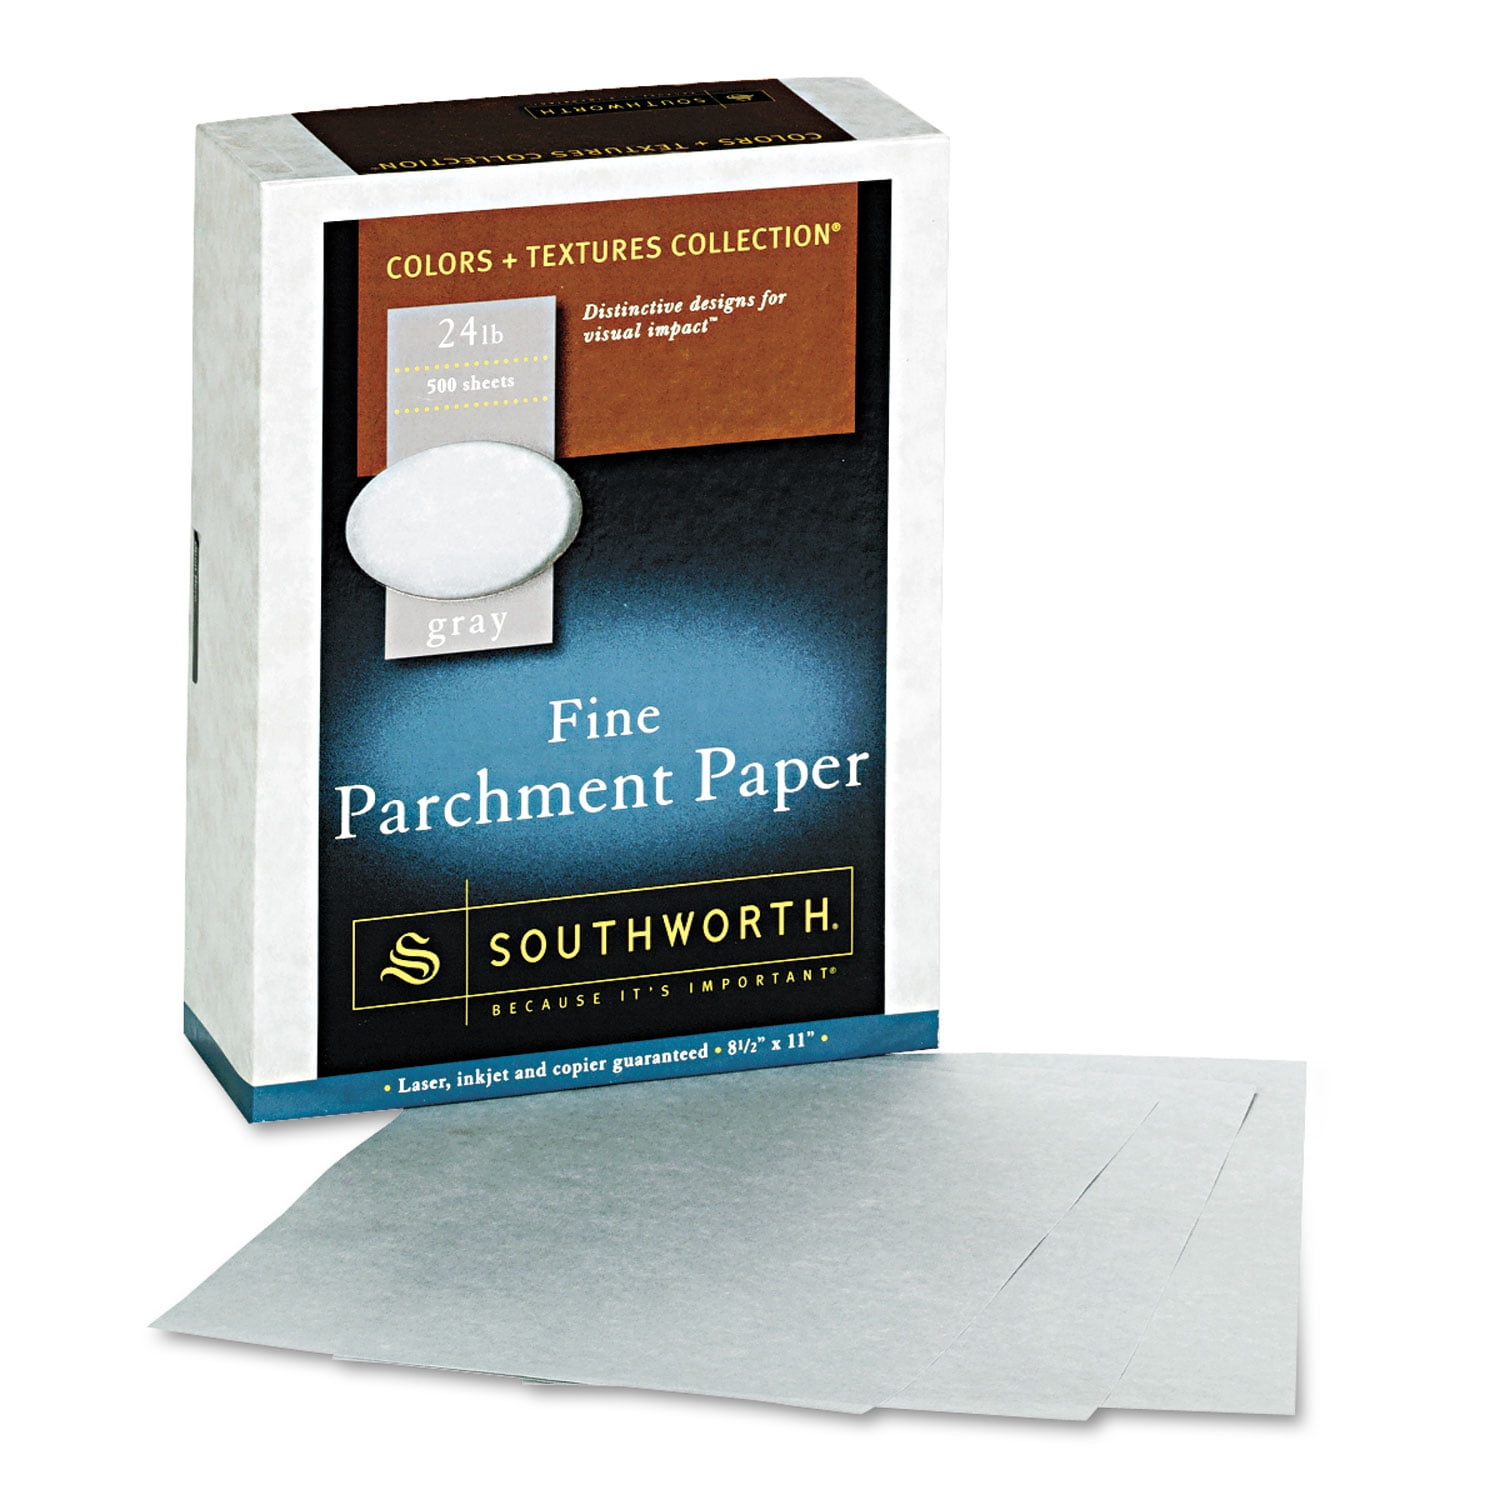 Southworth Parchment Certificates Ivory w/Green & Blue Border 24 lbs. 8-1/2  x 11